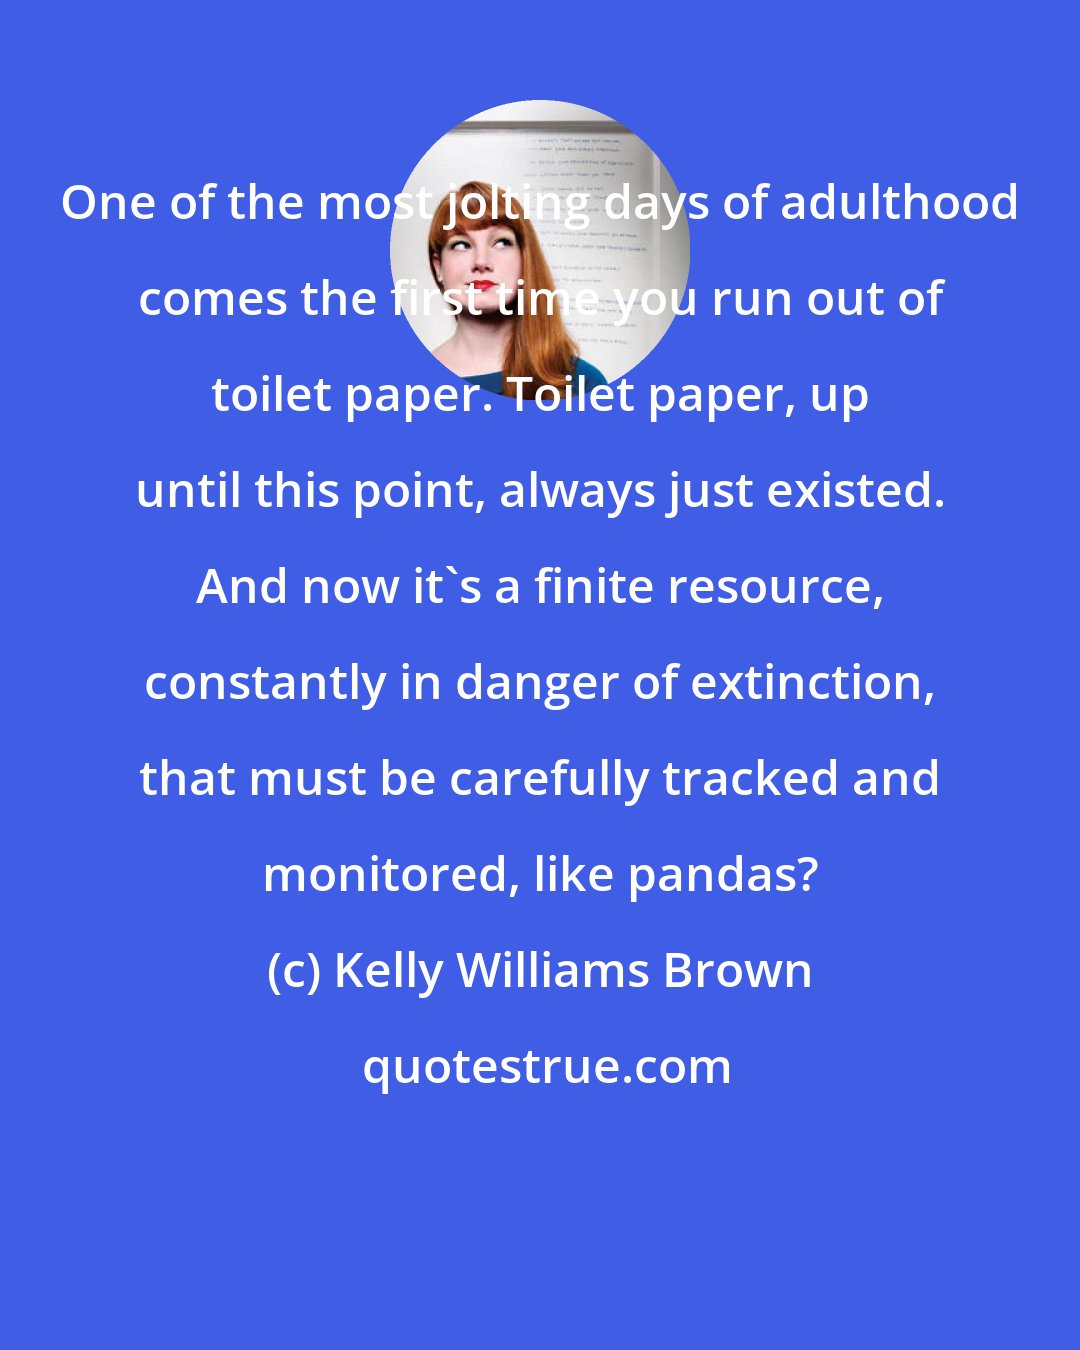 Kelly Williams Brown: One of the most jolting days of adulthood comes the first time you run out of toilet paper. Toilet paper, up until this point, always just existed. And now it's a finite resource, constantly in danger of extinction, that must be carefully tracked and monitored, like pandas?